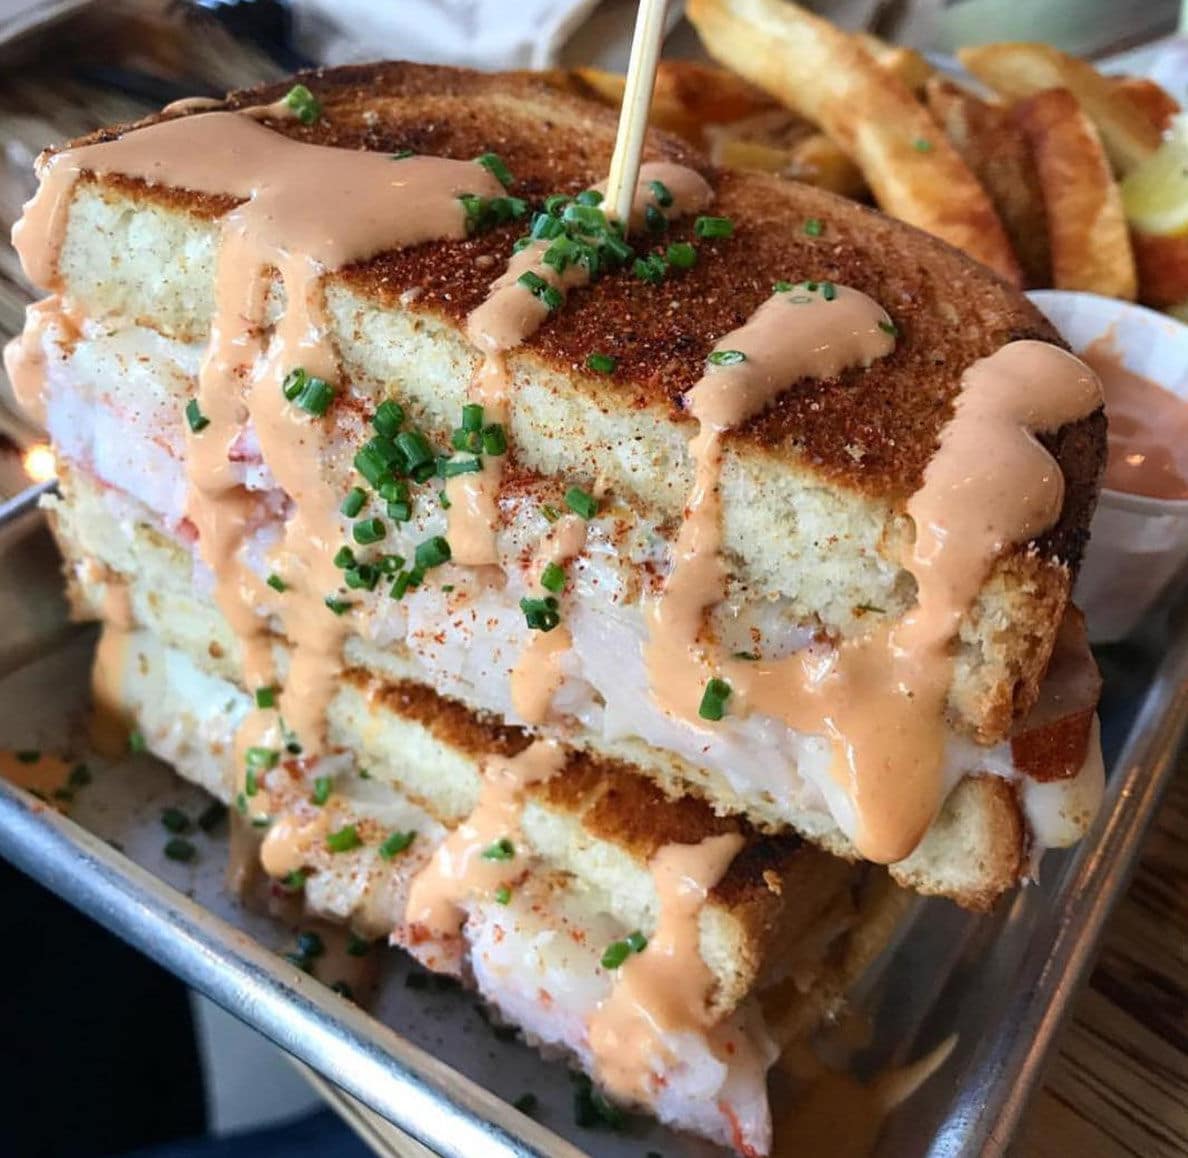 Slapfish bills itself as "ridiculously fresh, refreshingly responsible." Here's a look at the restaurant's clobster grilled cheese. (Courtesy Slapfish)